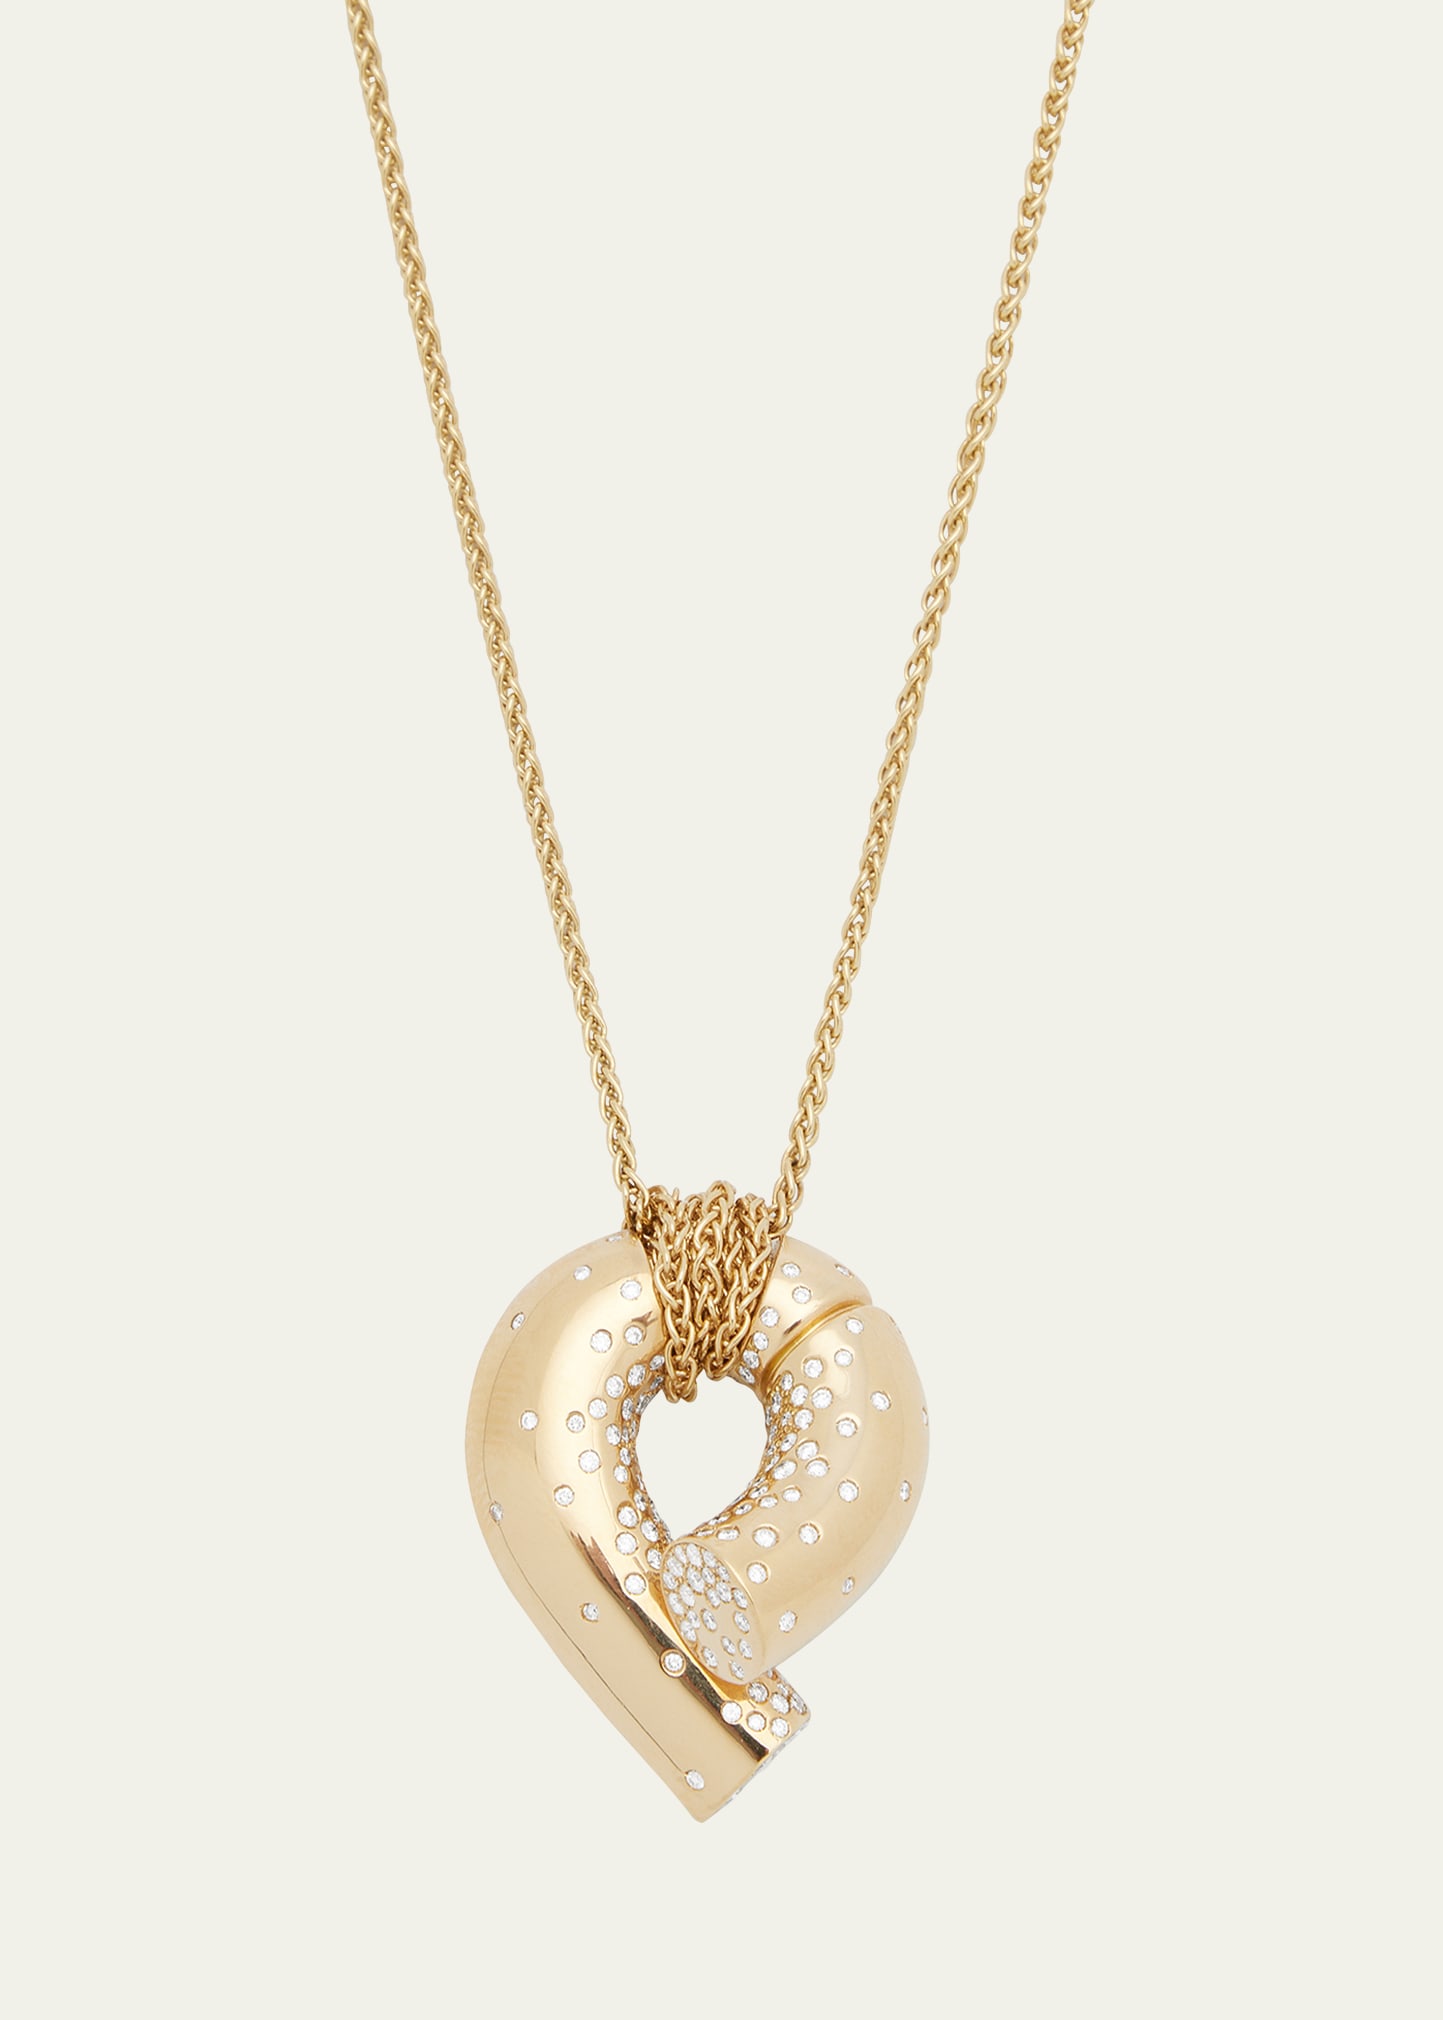 18k Fairmined Yellow Gold Oera Pendant Necklace with Diamonds